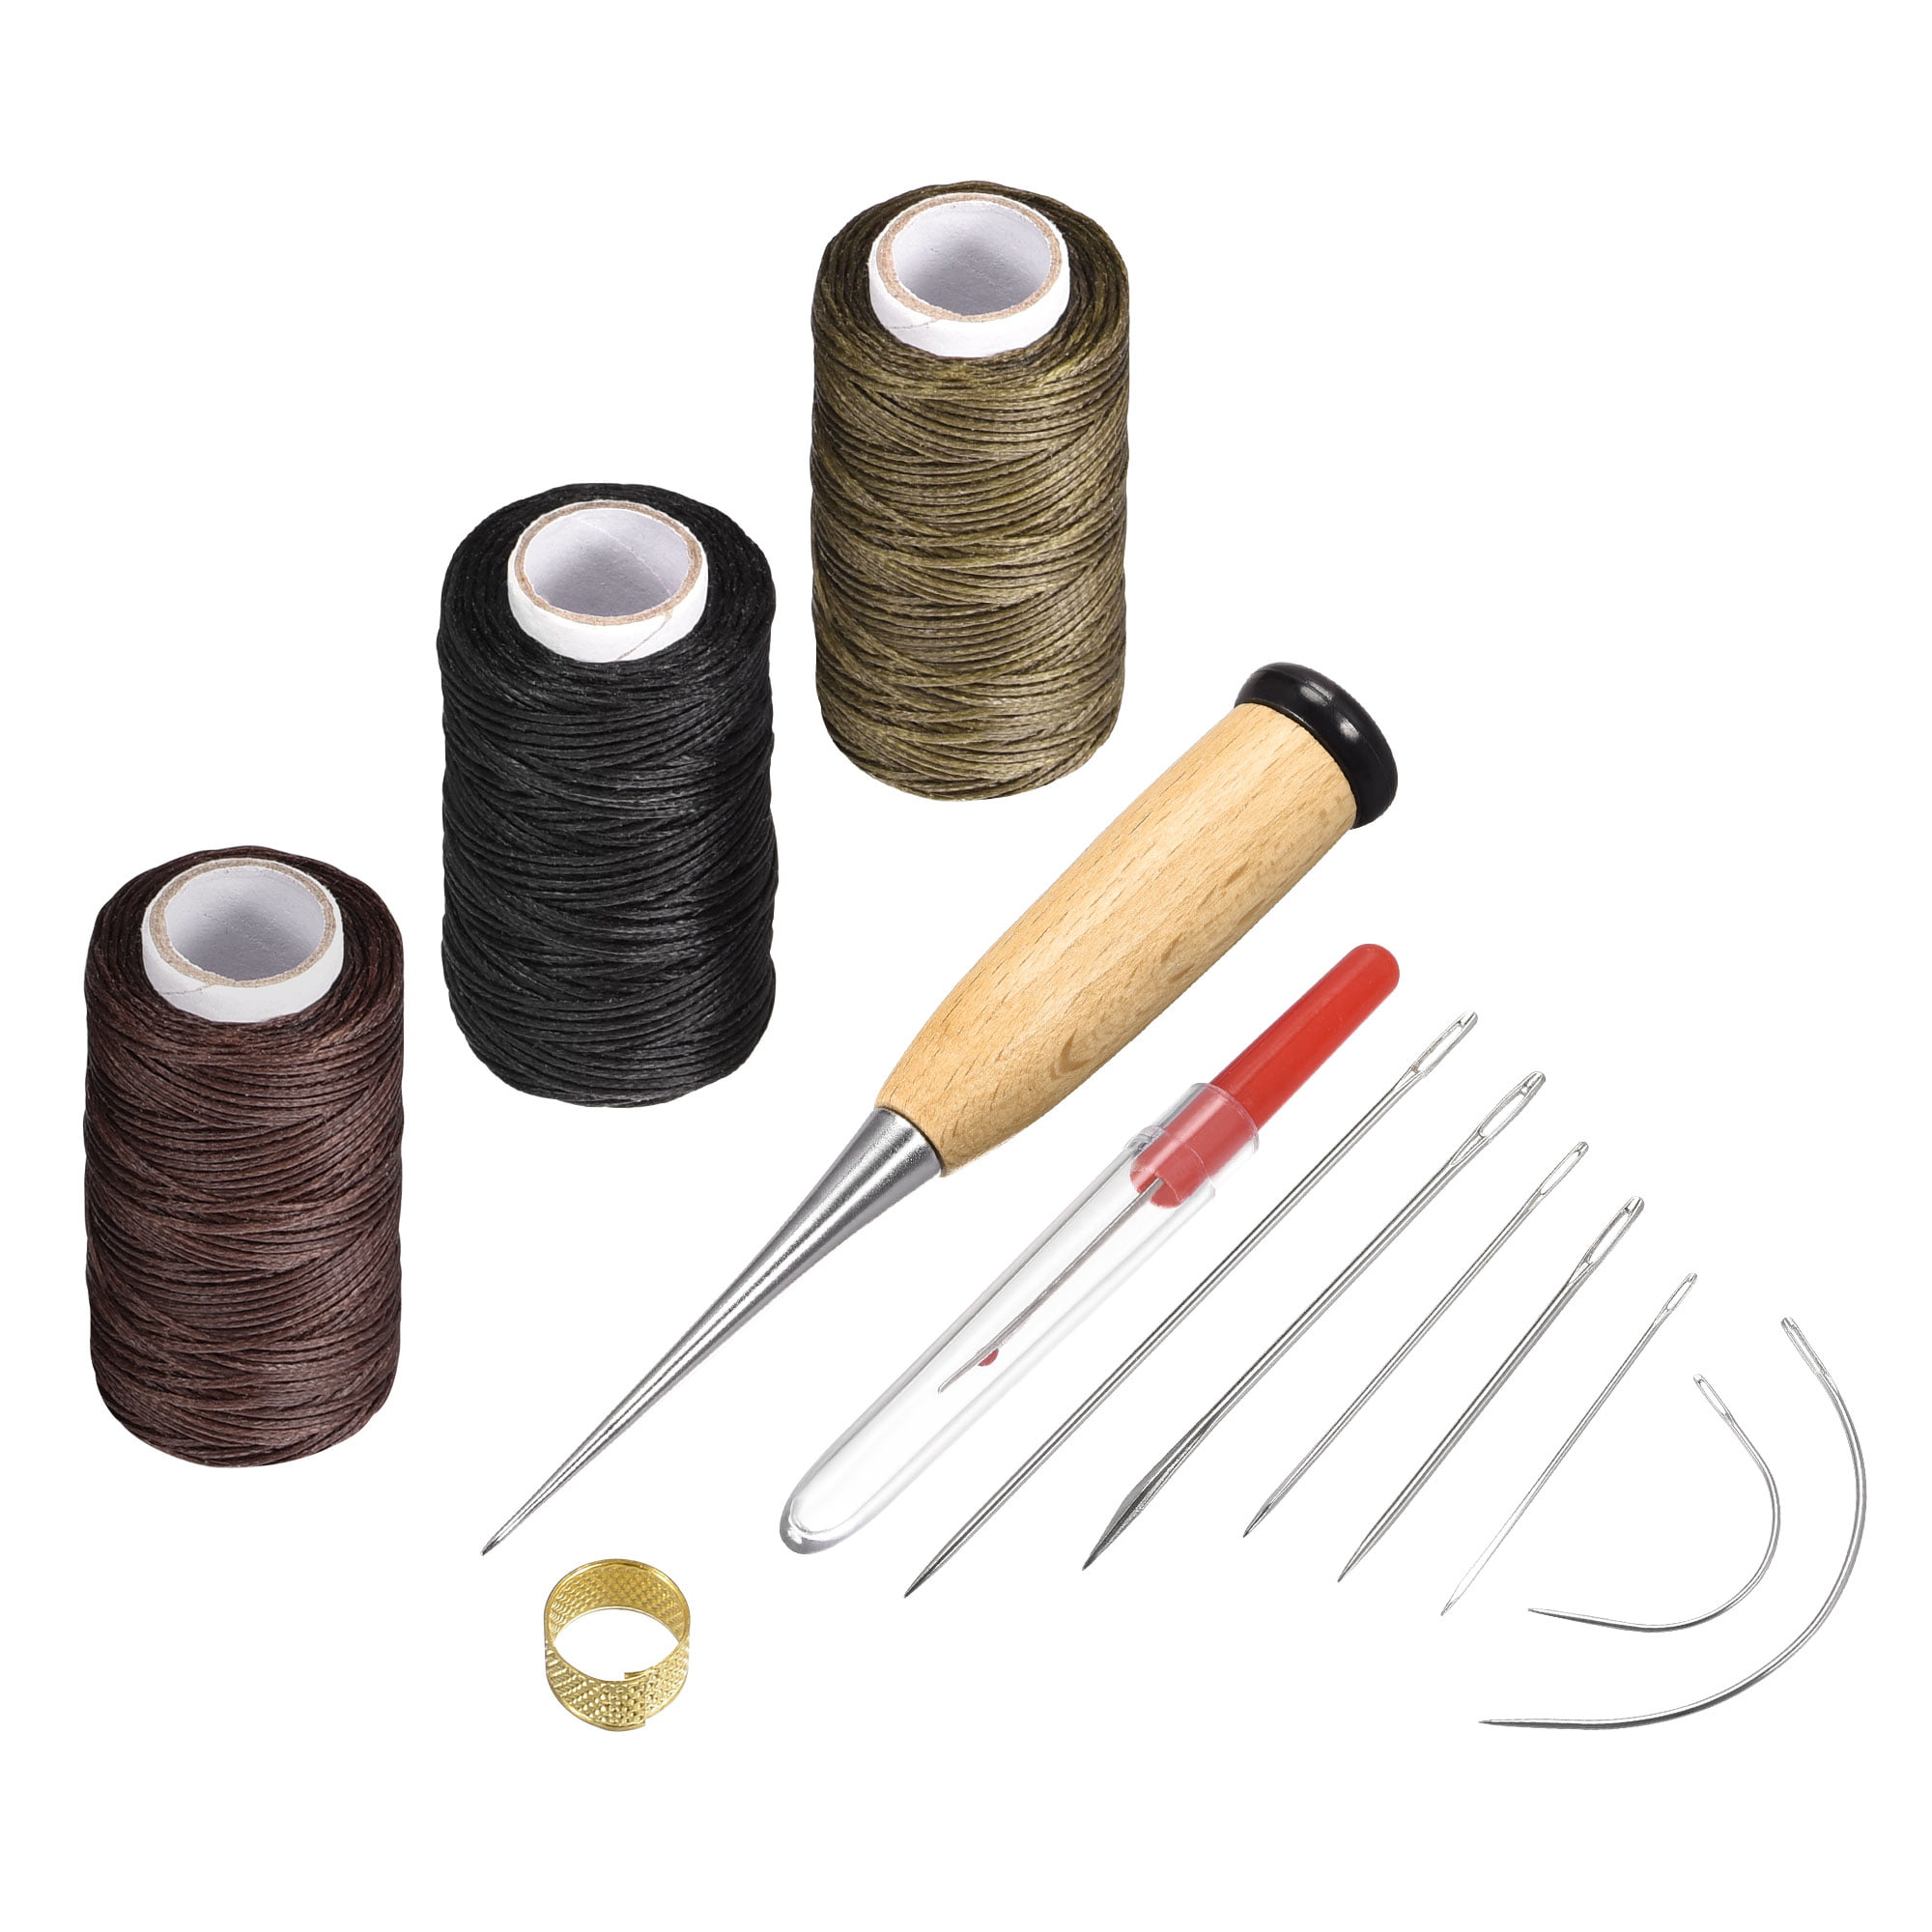 13Pcs Set Leather Craft Main Couture Sewing Outil Filetage Alêne Waxed Thimble Kit 